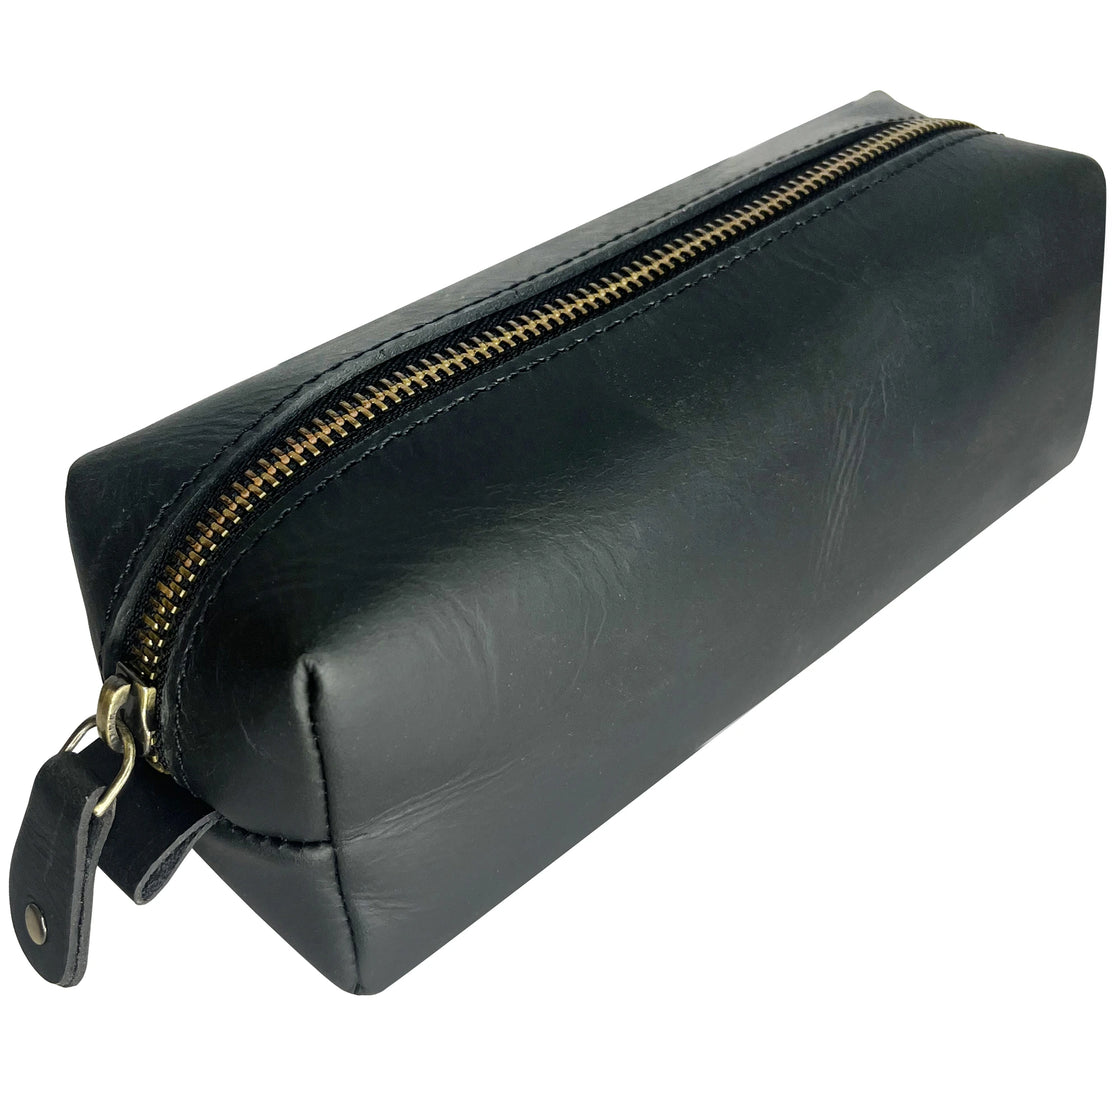 Zippered leather pencil case, Leather pencil pouch, Small leather